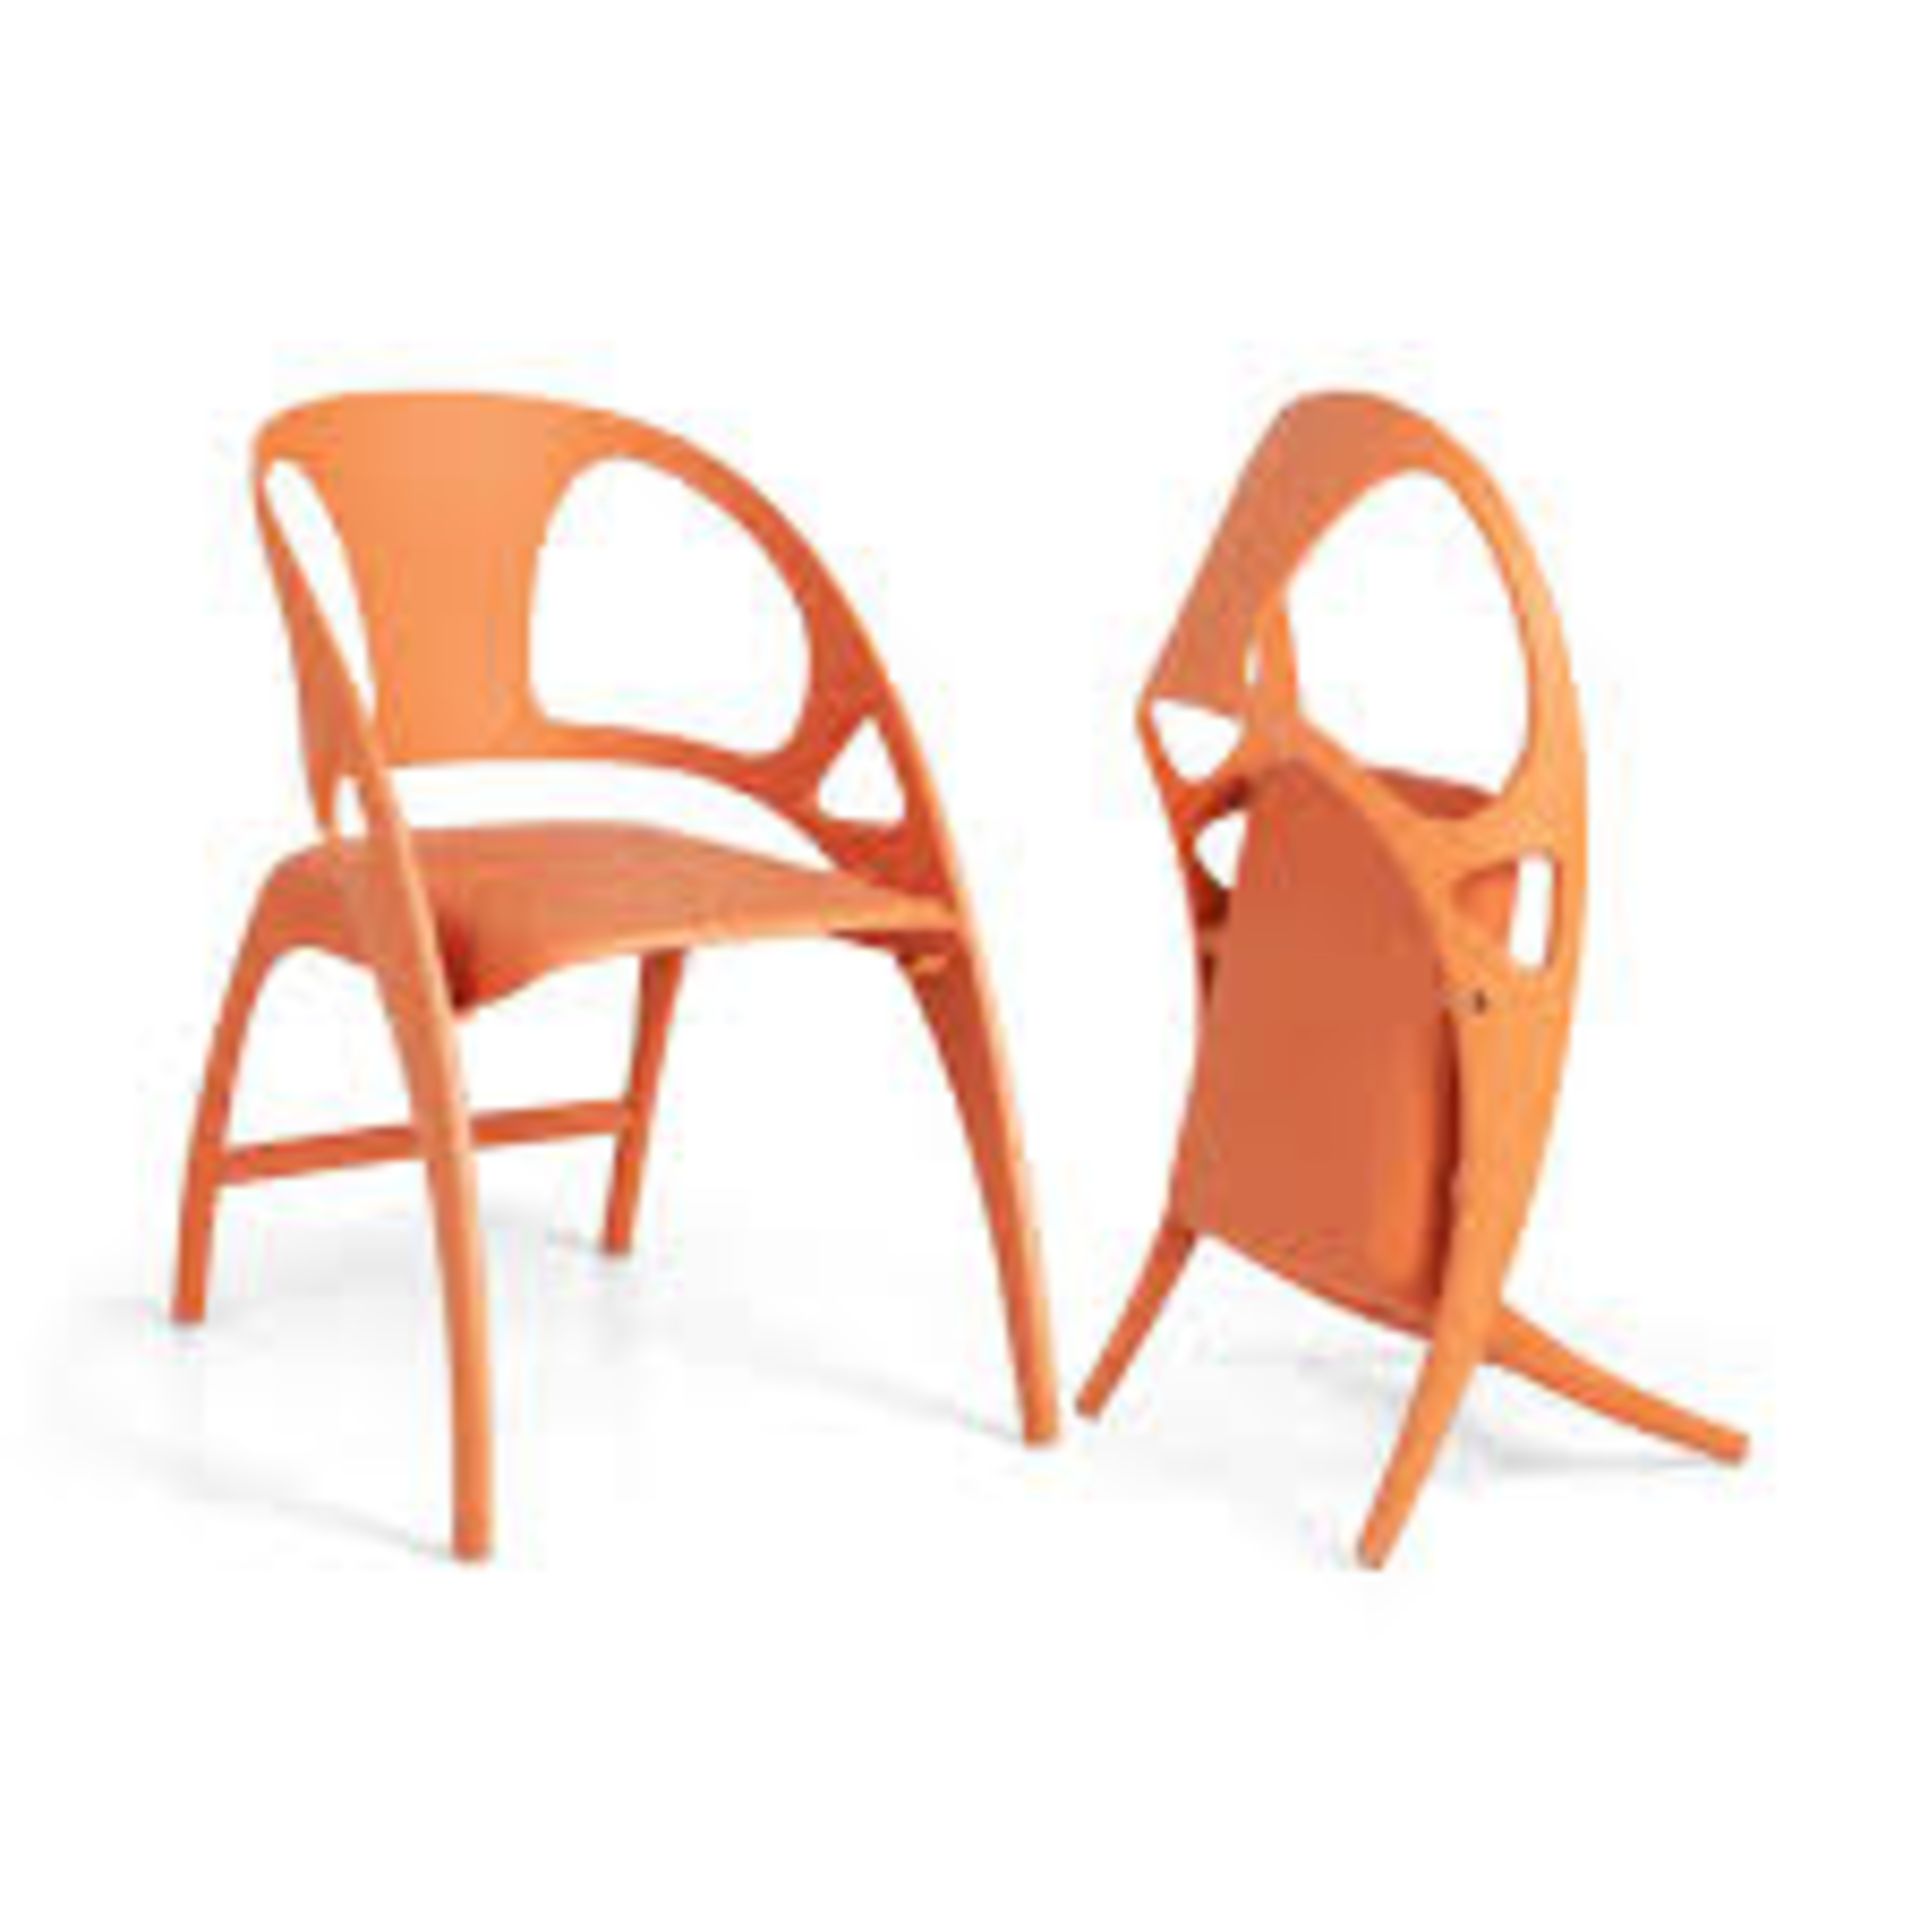 Set of 2 Folding Chair with Backrest and Armrest. - R14.8. The plastic dining chair set includes 2